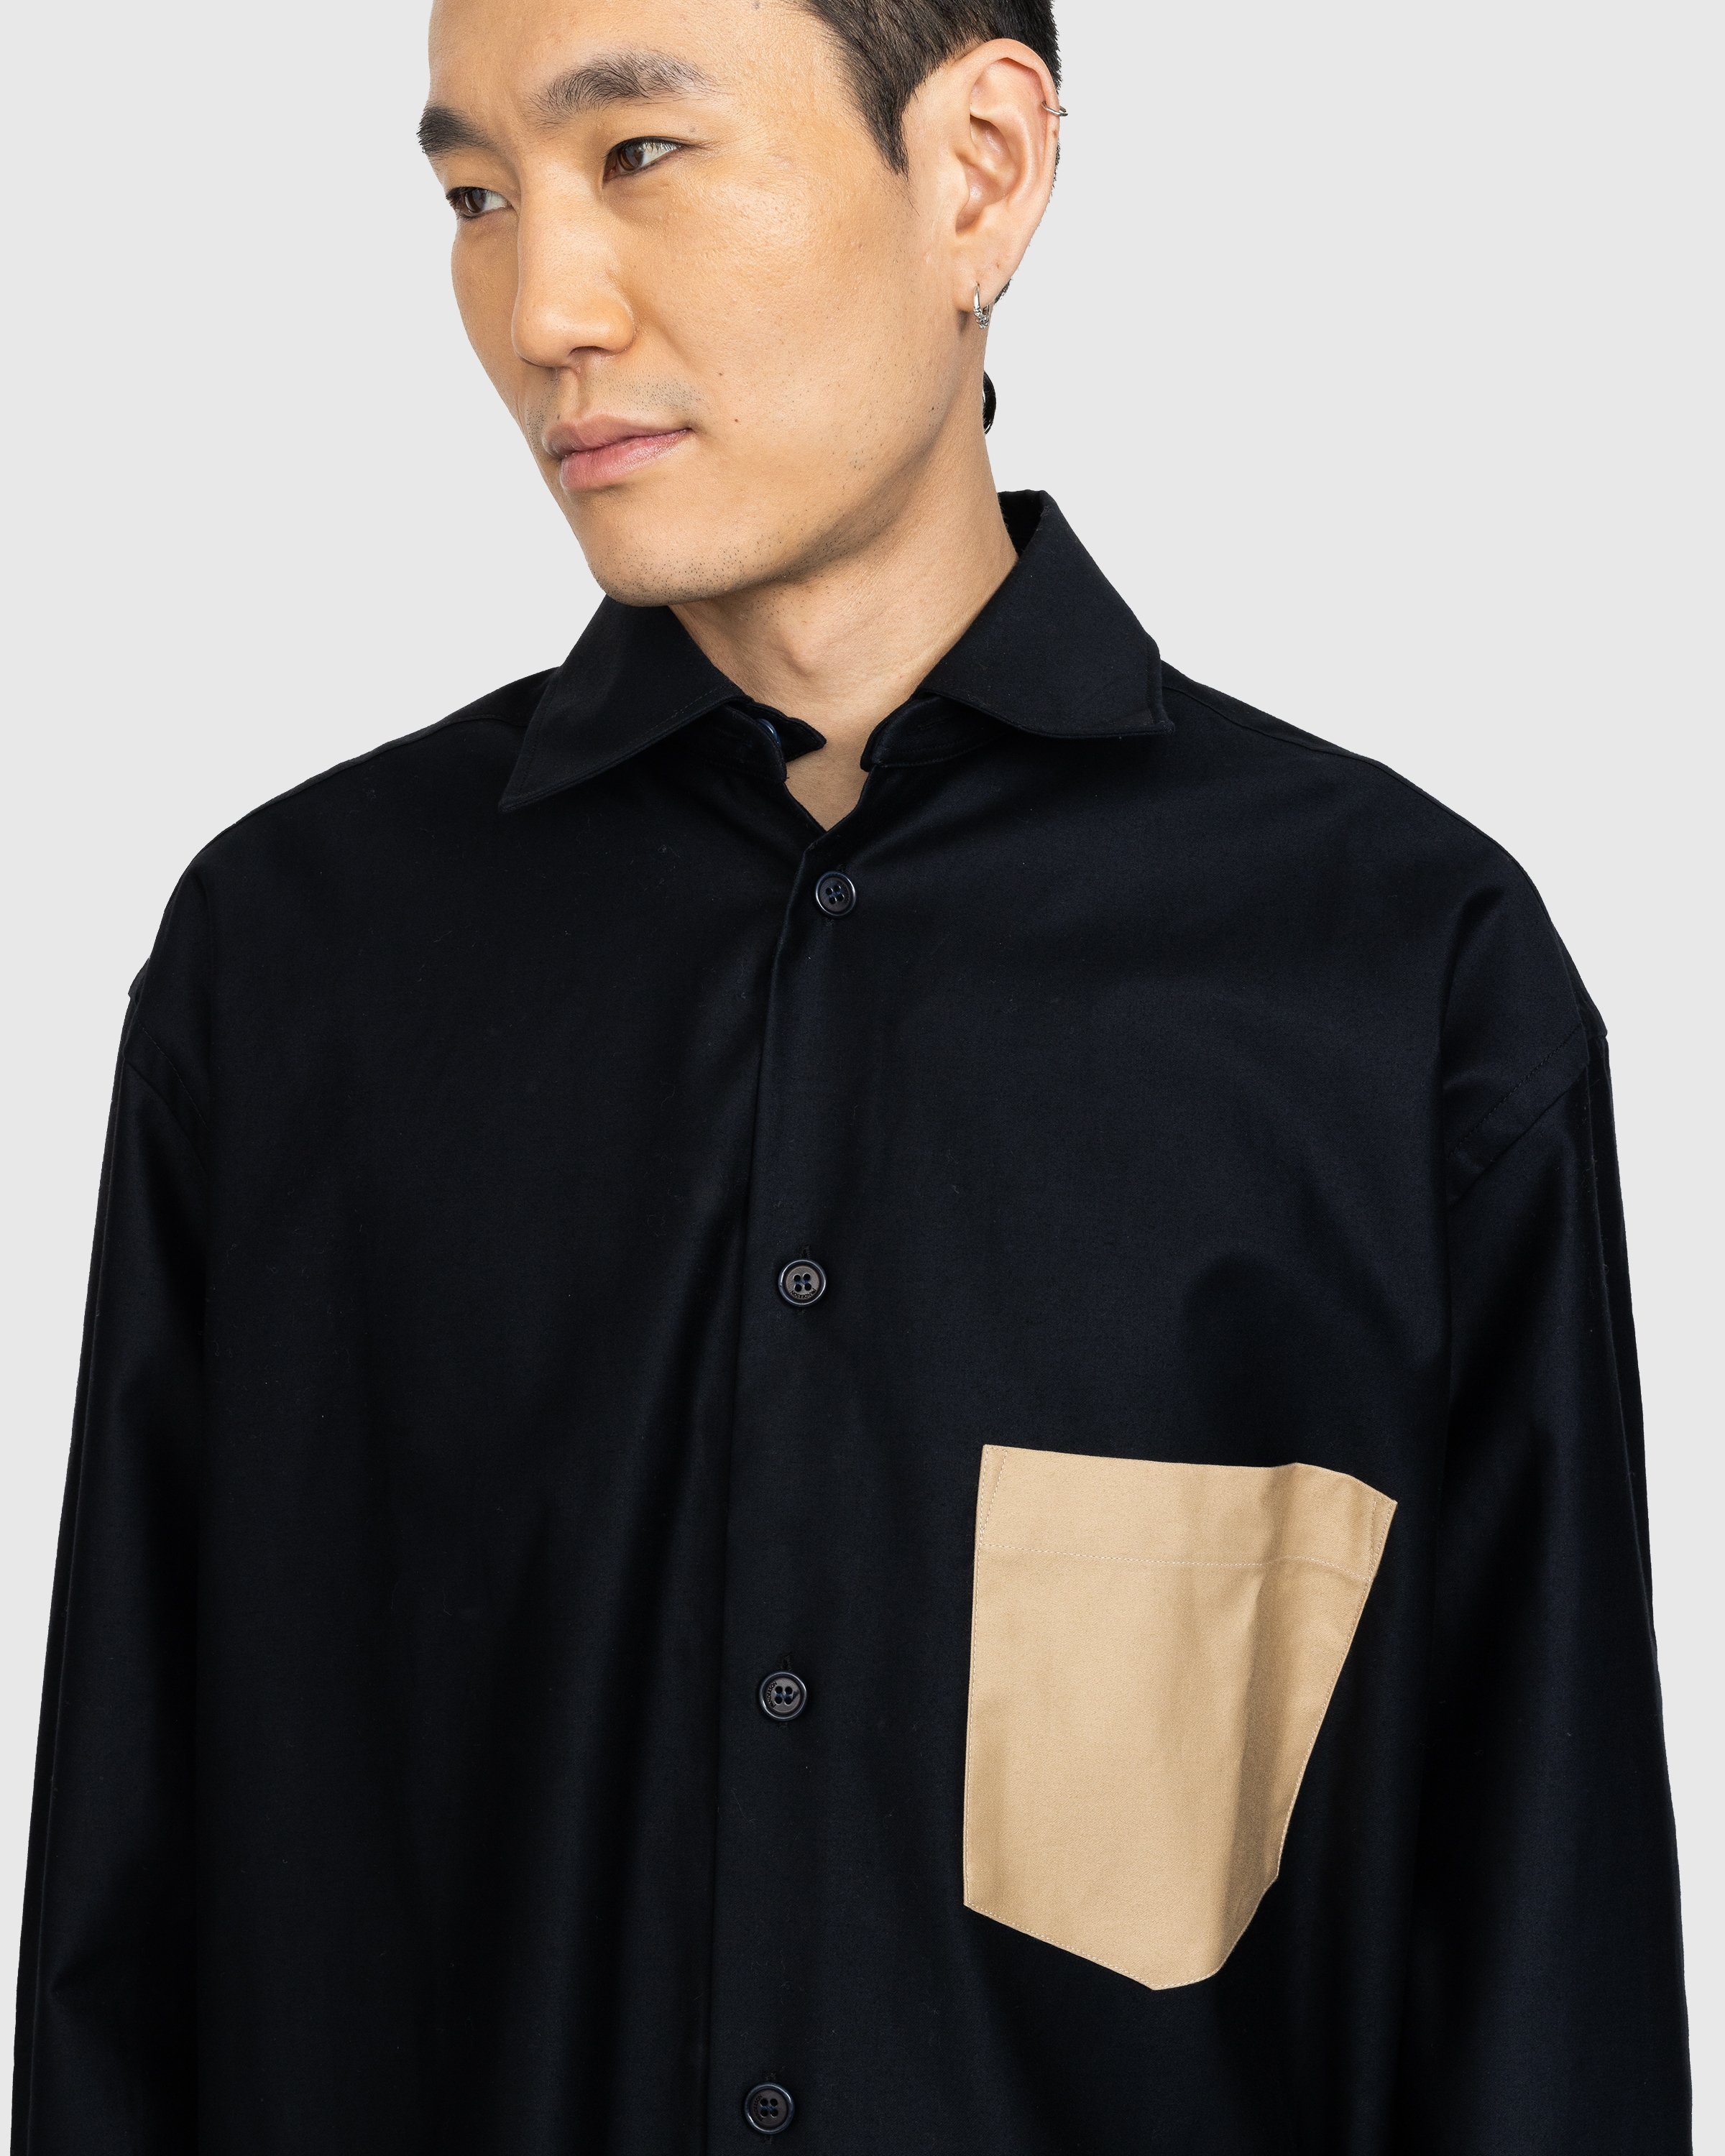 J.W. Anderson - Contrast Patch Pocket Oversized Shirt Navy Blue - Clothing - Blue - Image 4